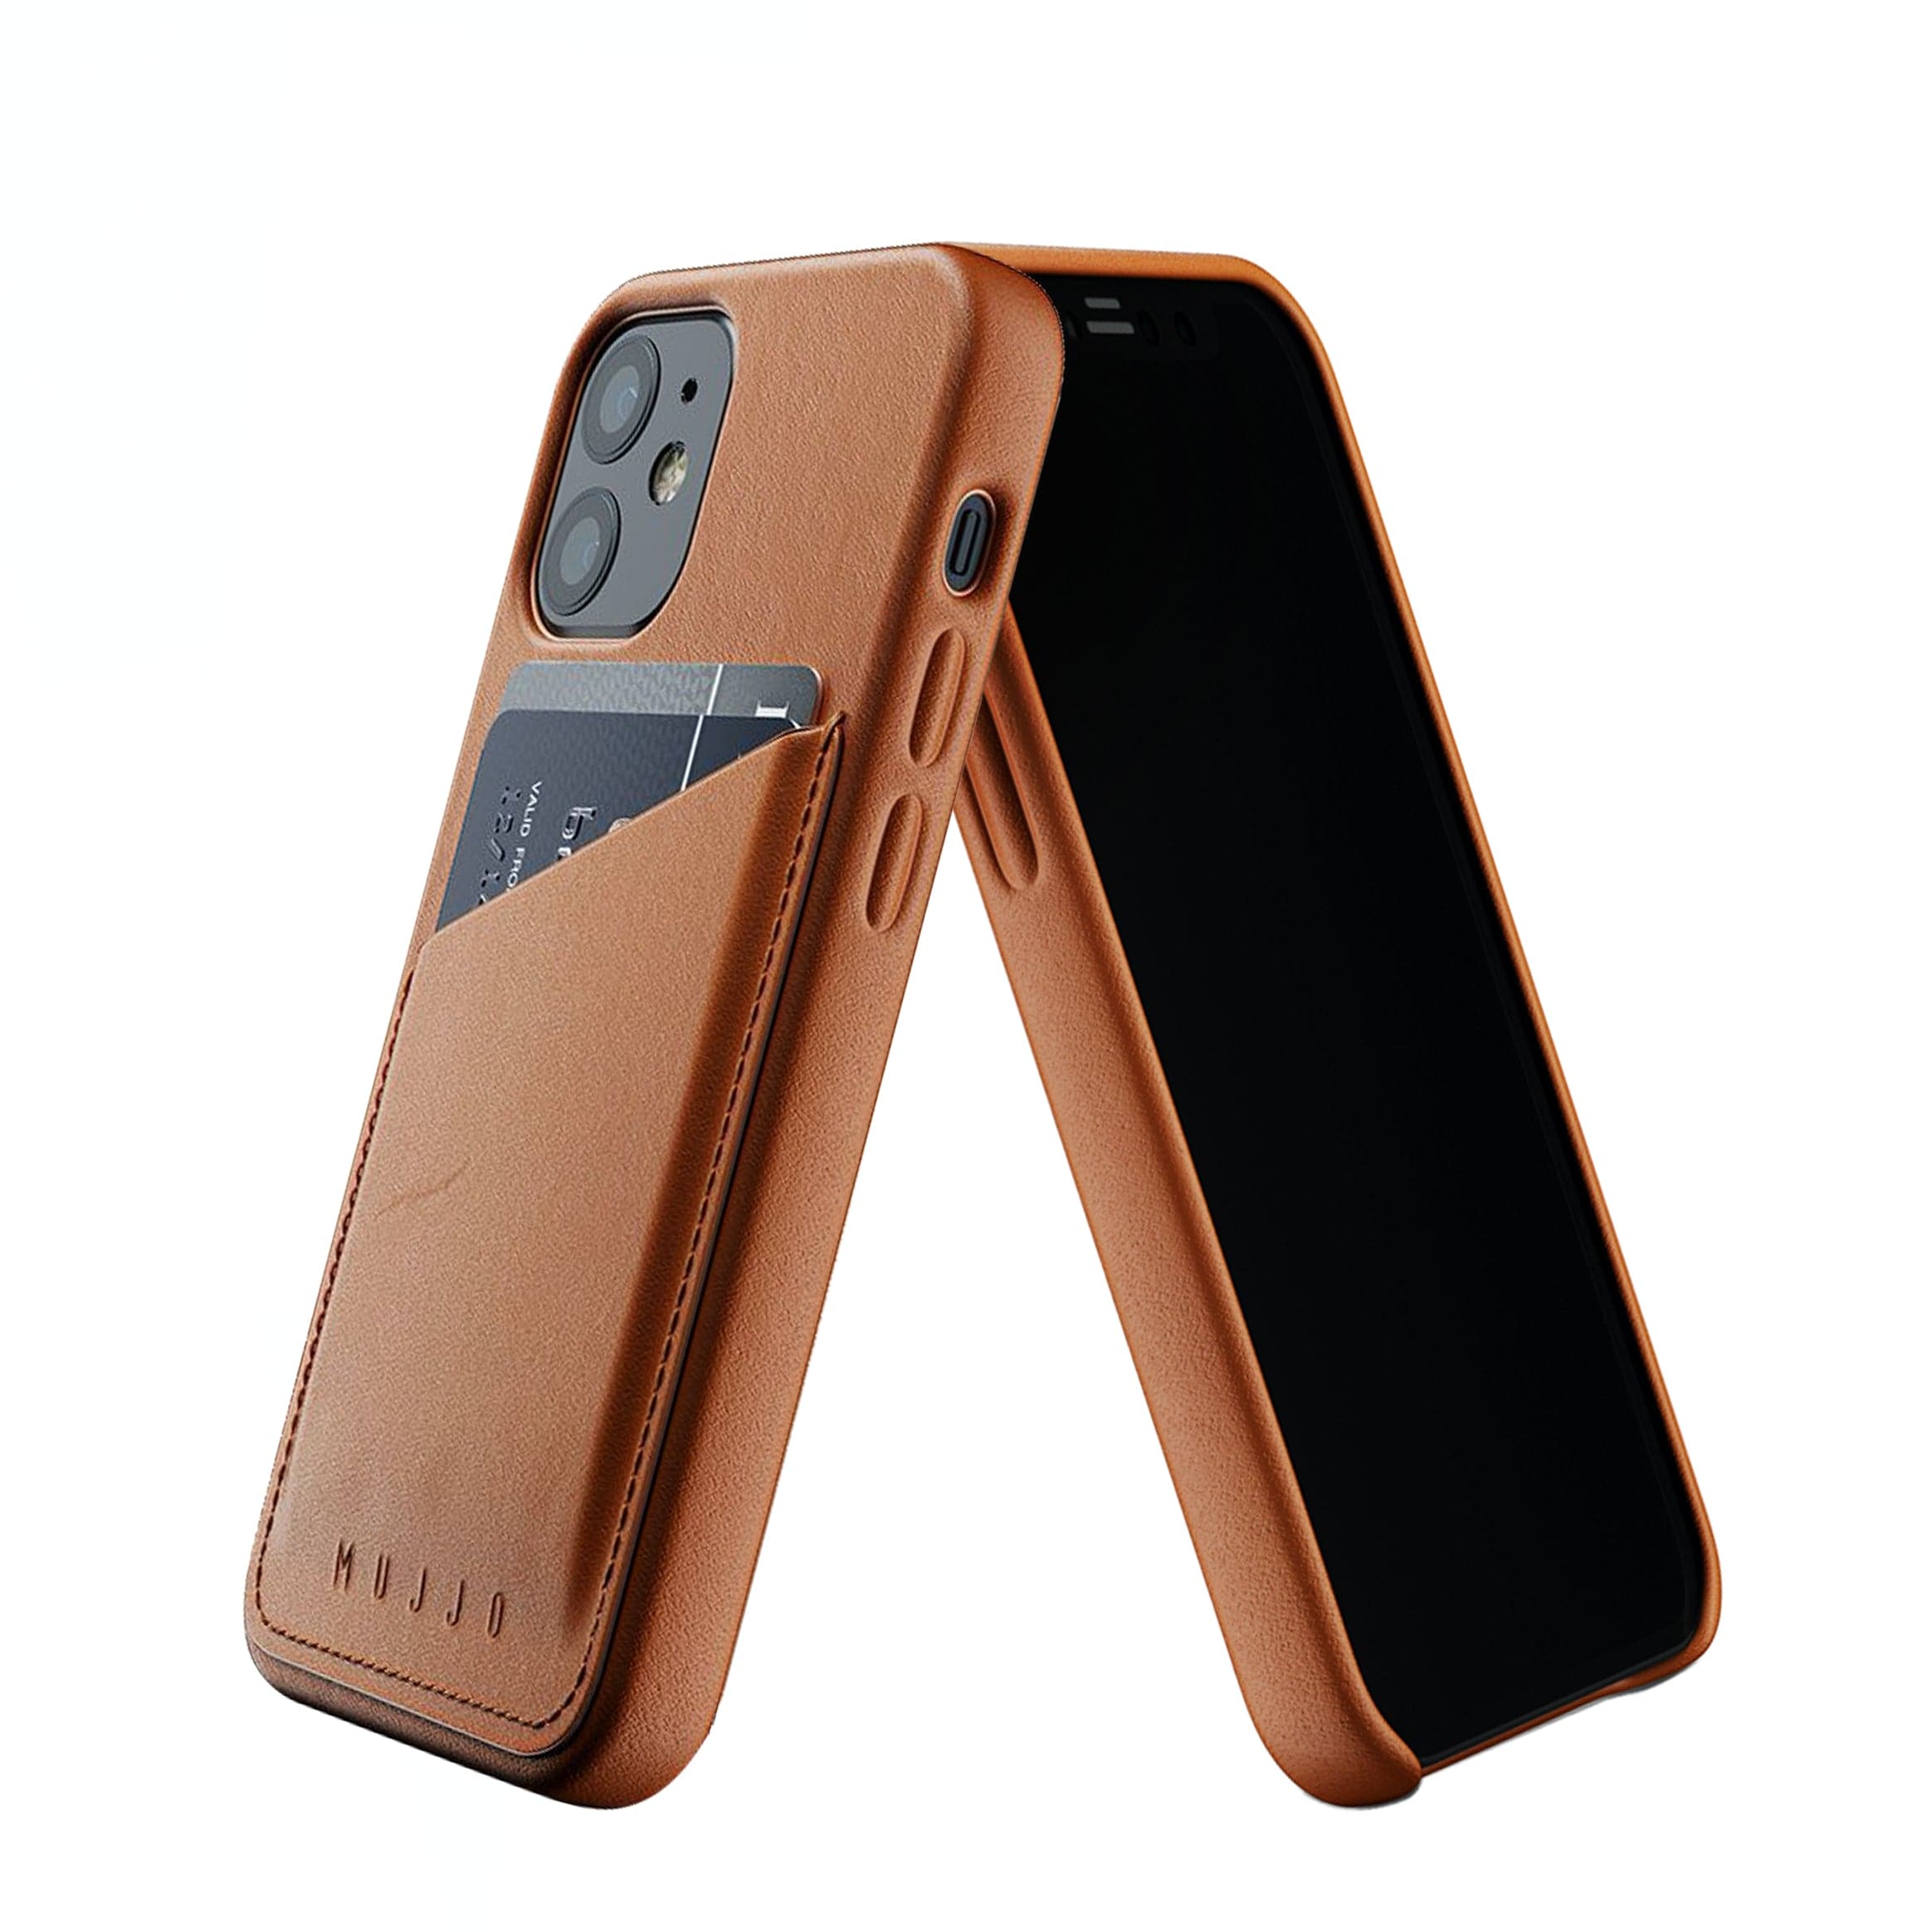 Mujjo Full Leather Wallet case for iPhone 12 mini